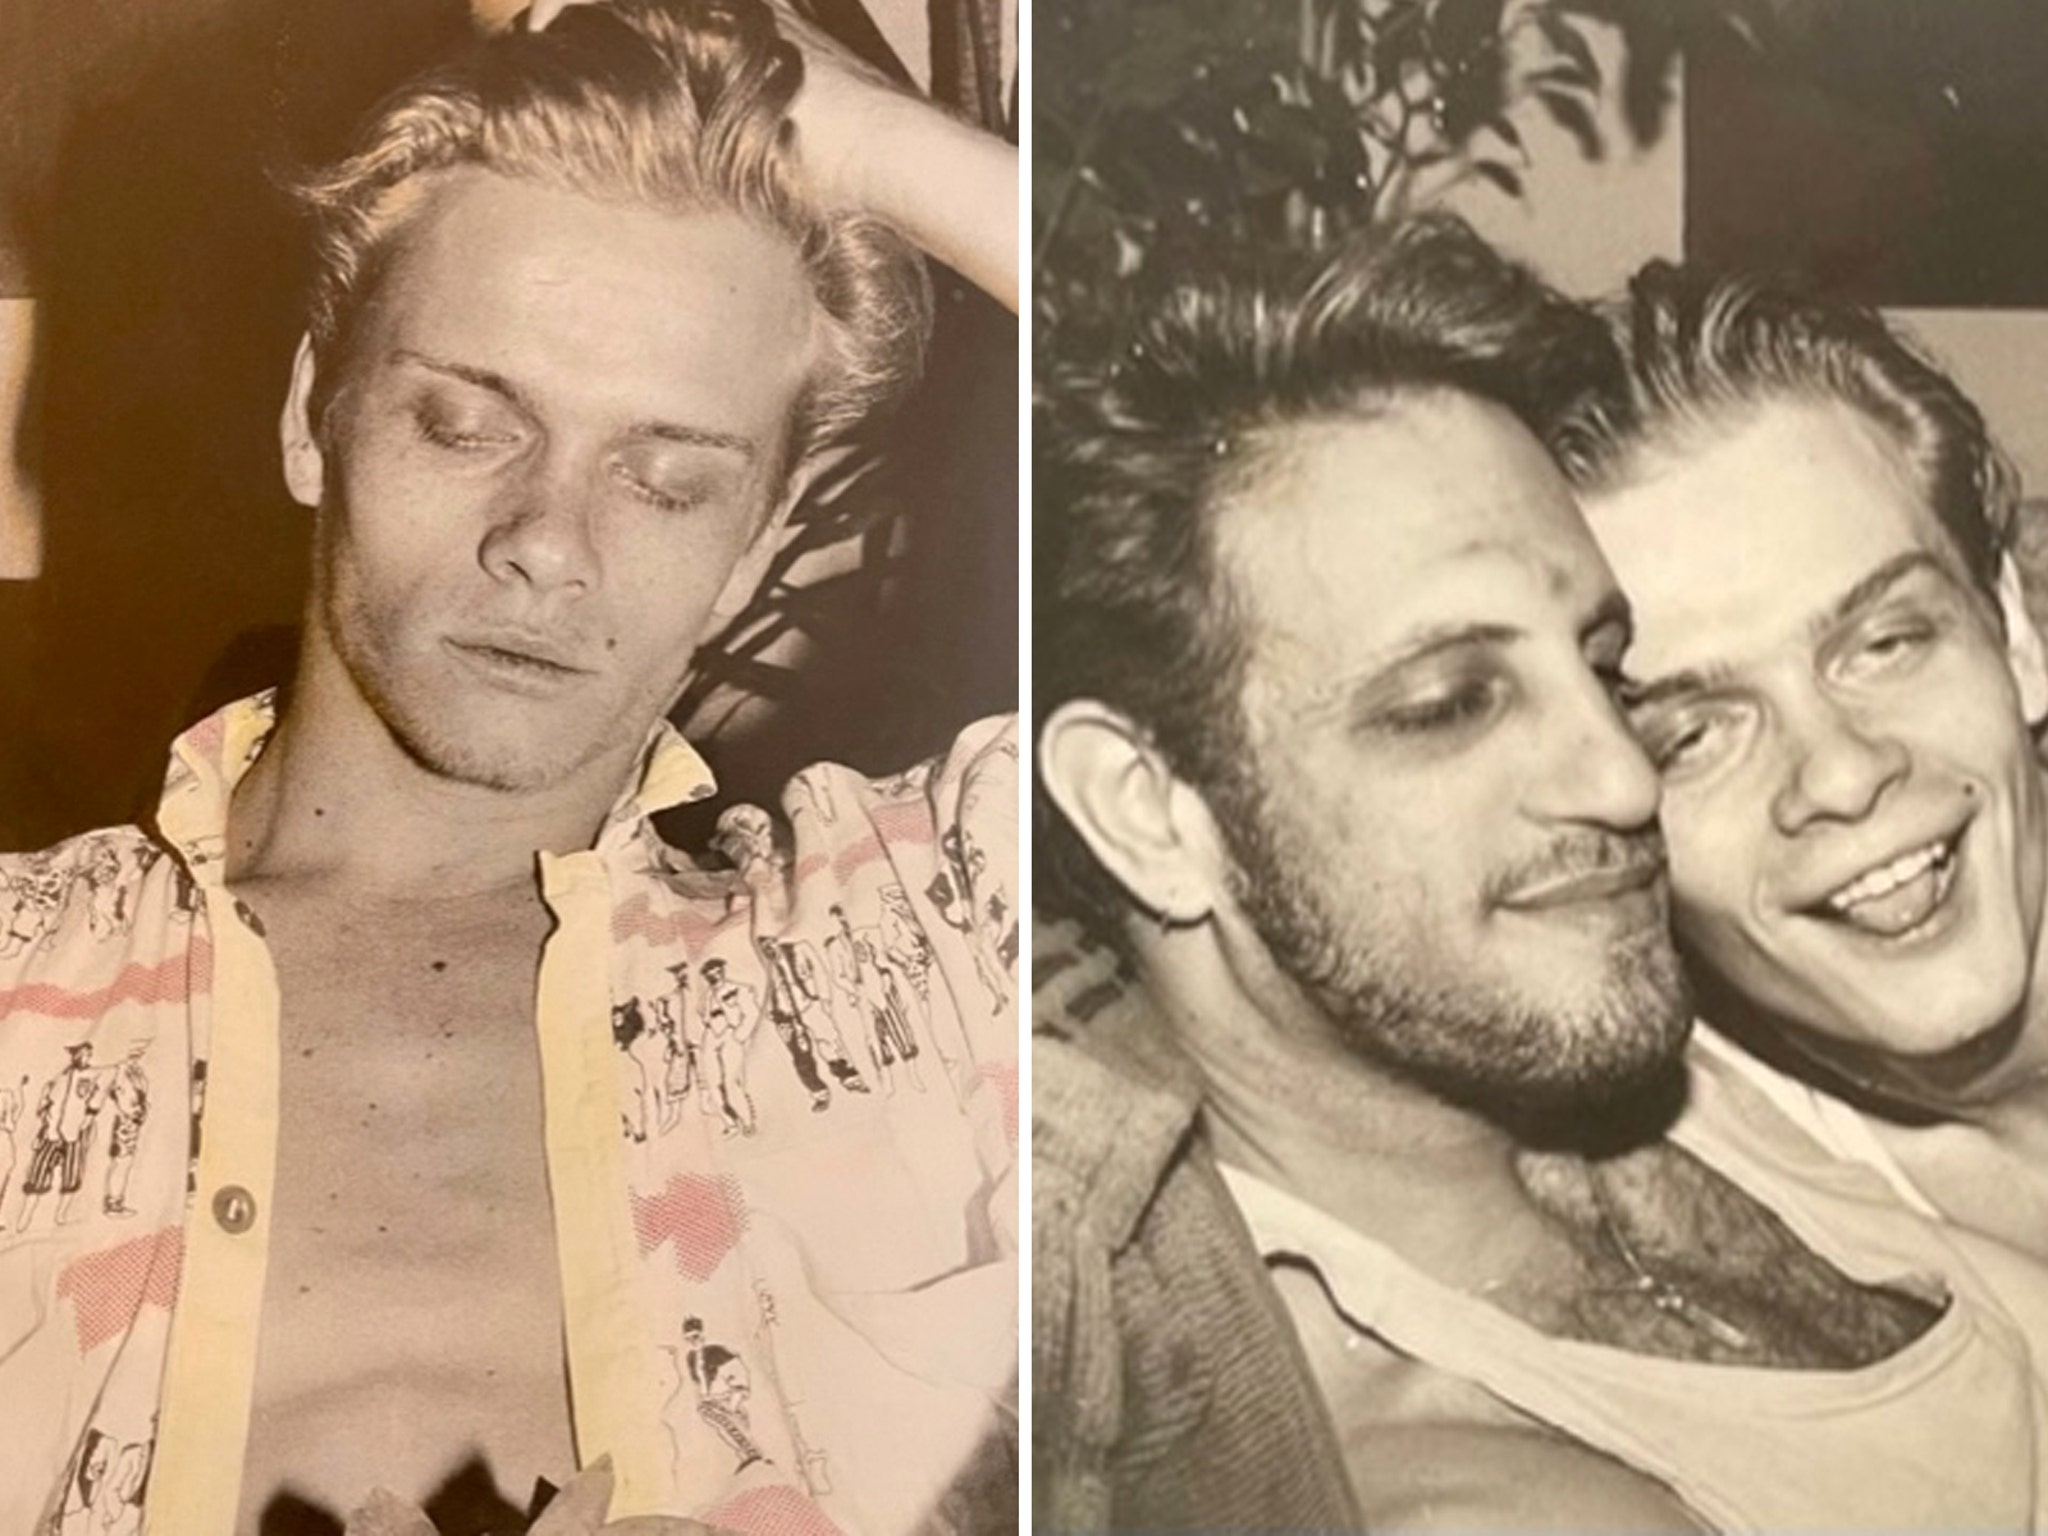 Gay Porn Star Billy Newtons Brutal Murder Solved Thanks to Amateur Sleuths 32 Years Later photo